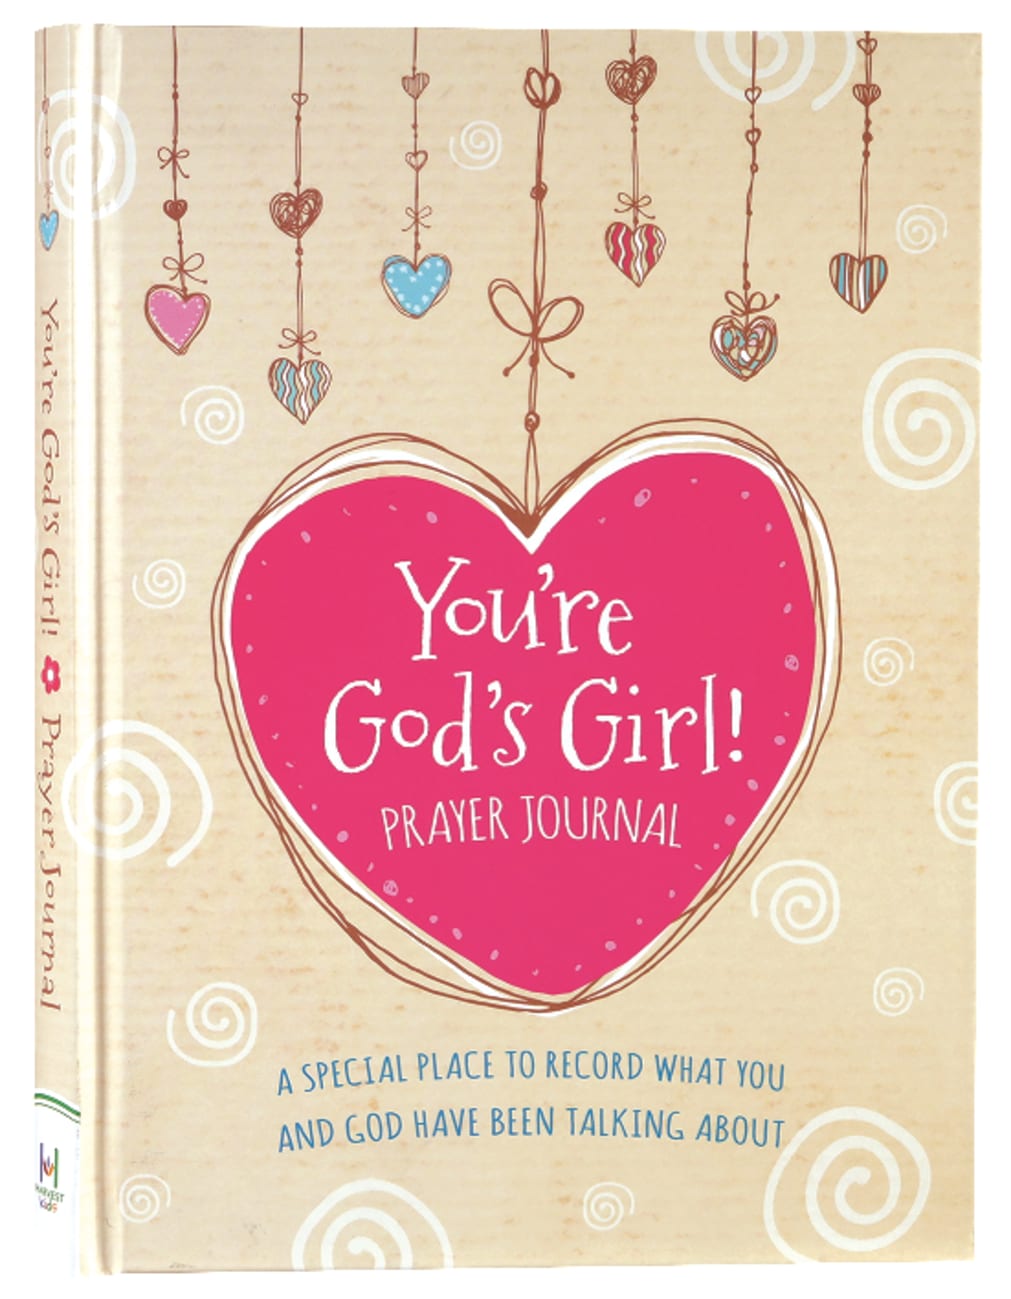 You're God's Girl! Prayer Journal: A Special Place to Record What You and God Have Been Talking About Hardback